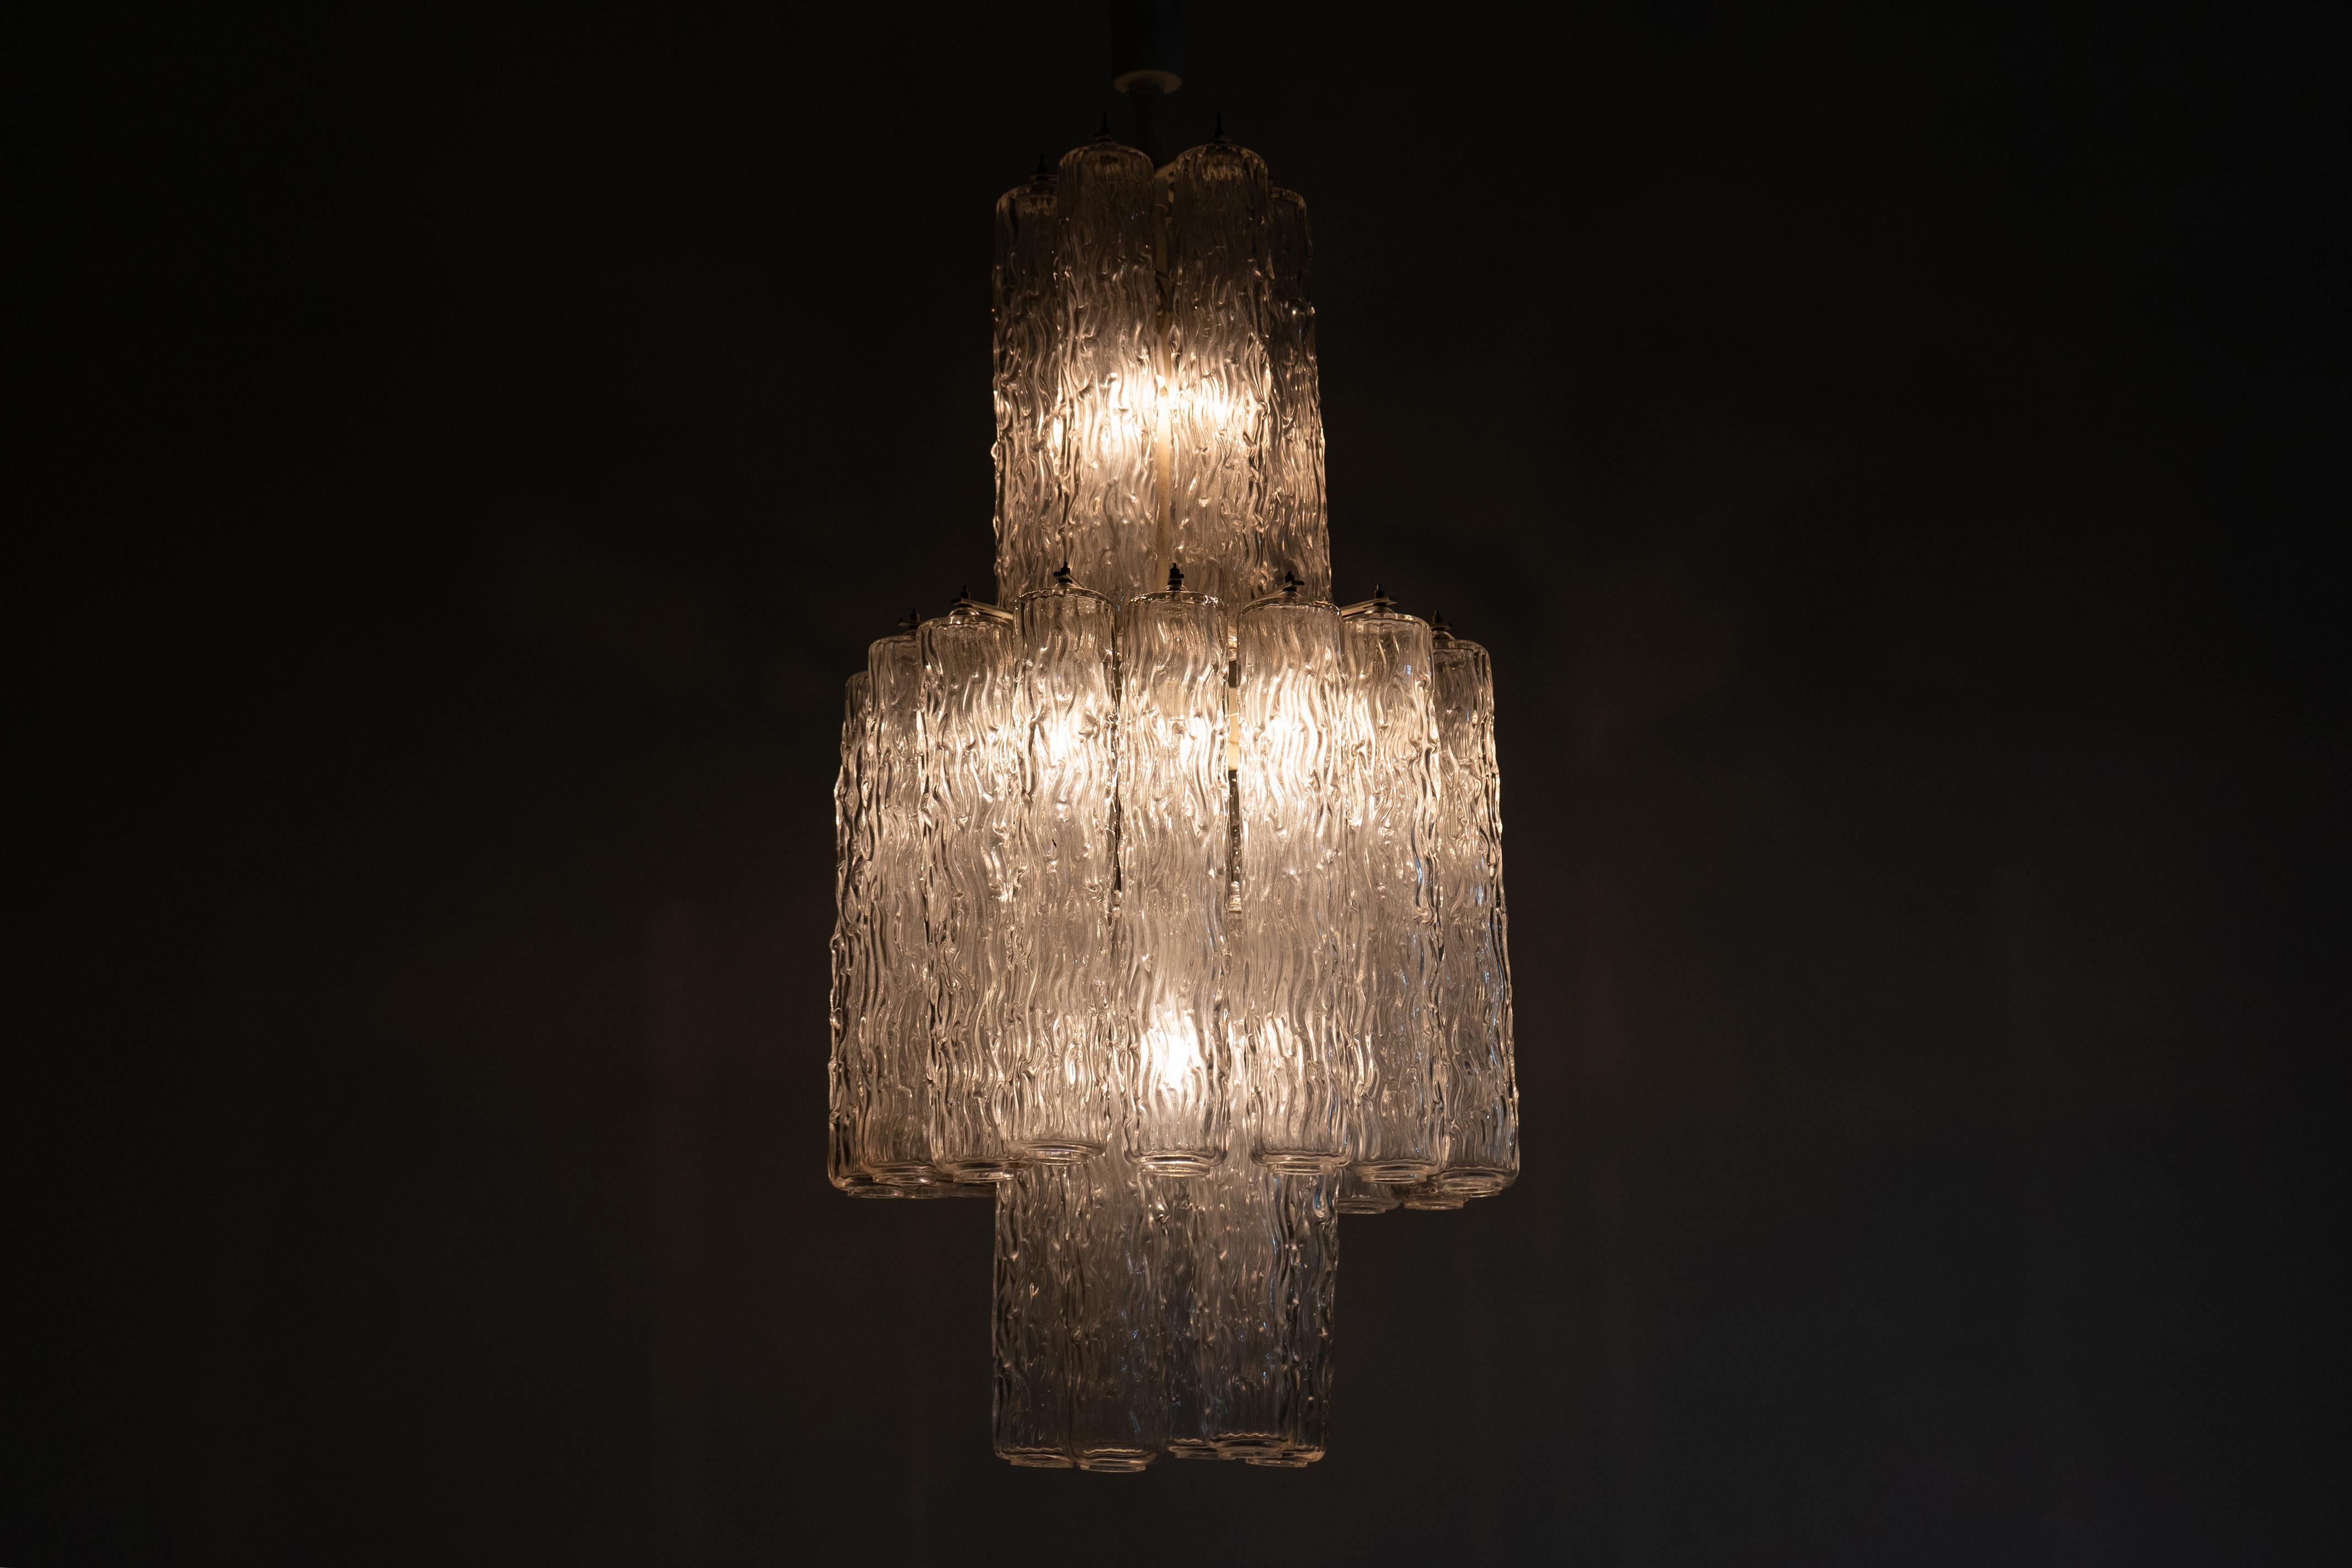 Original chandelier produced by Venini from the 1960s, 